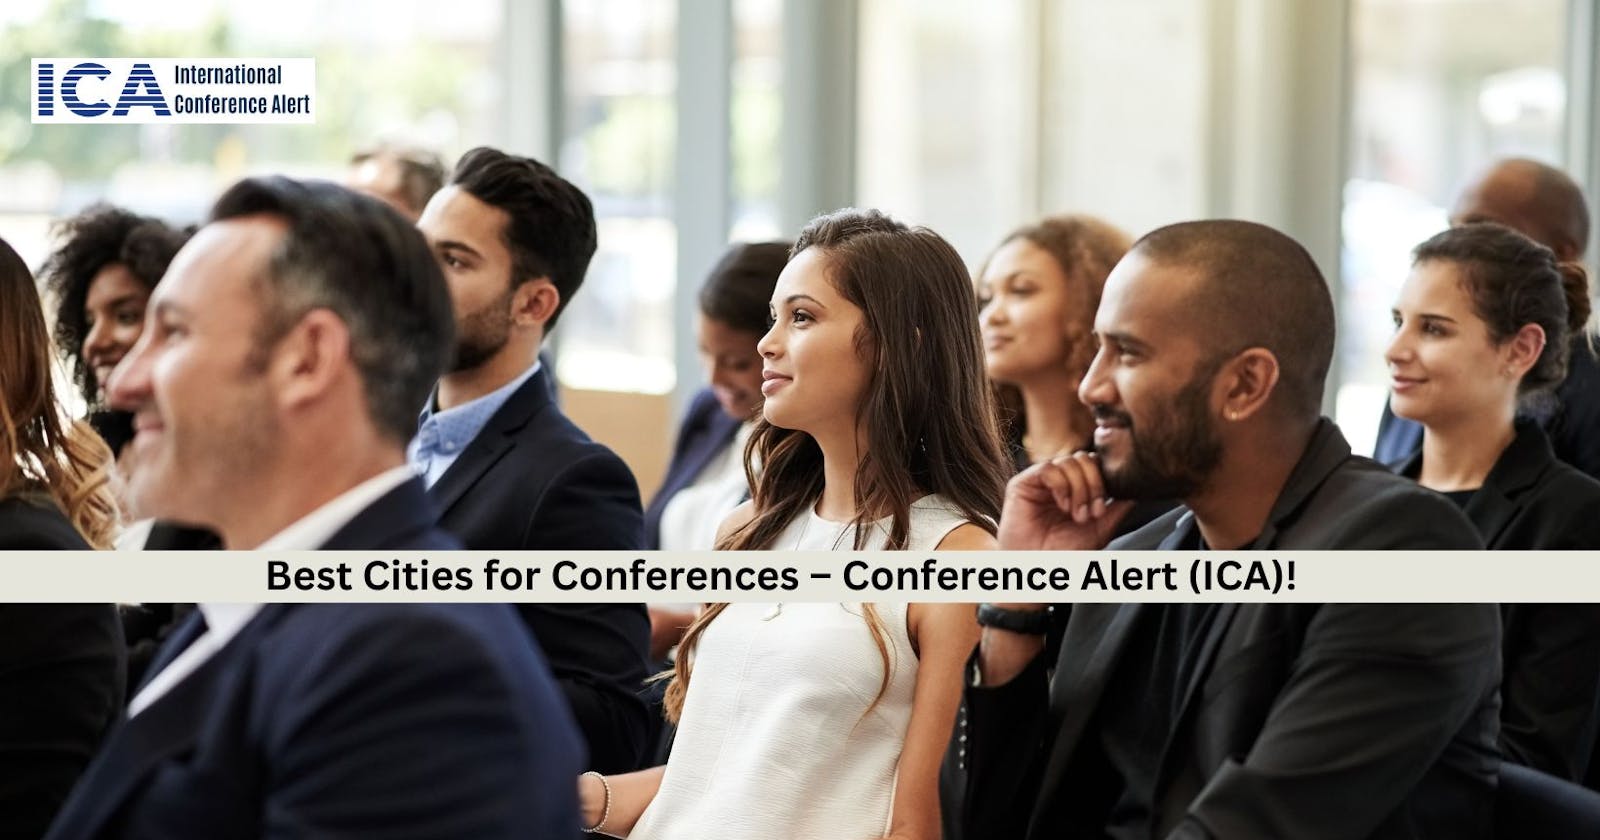 Best Cities for Conferences – Conference Alert (ICA)!